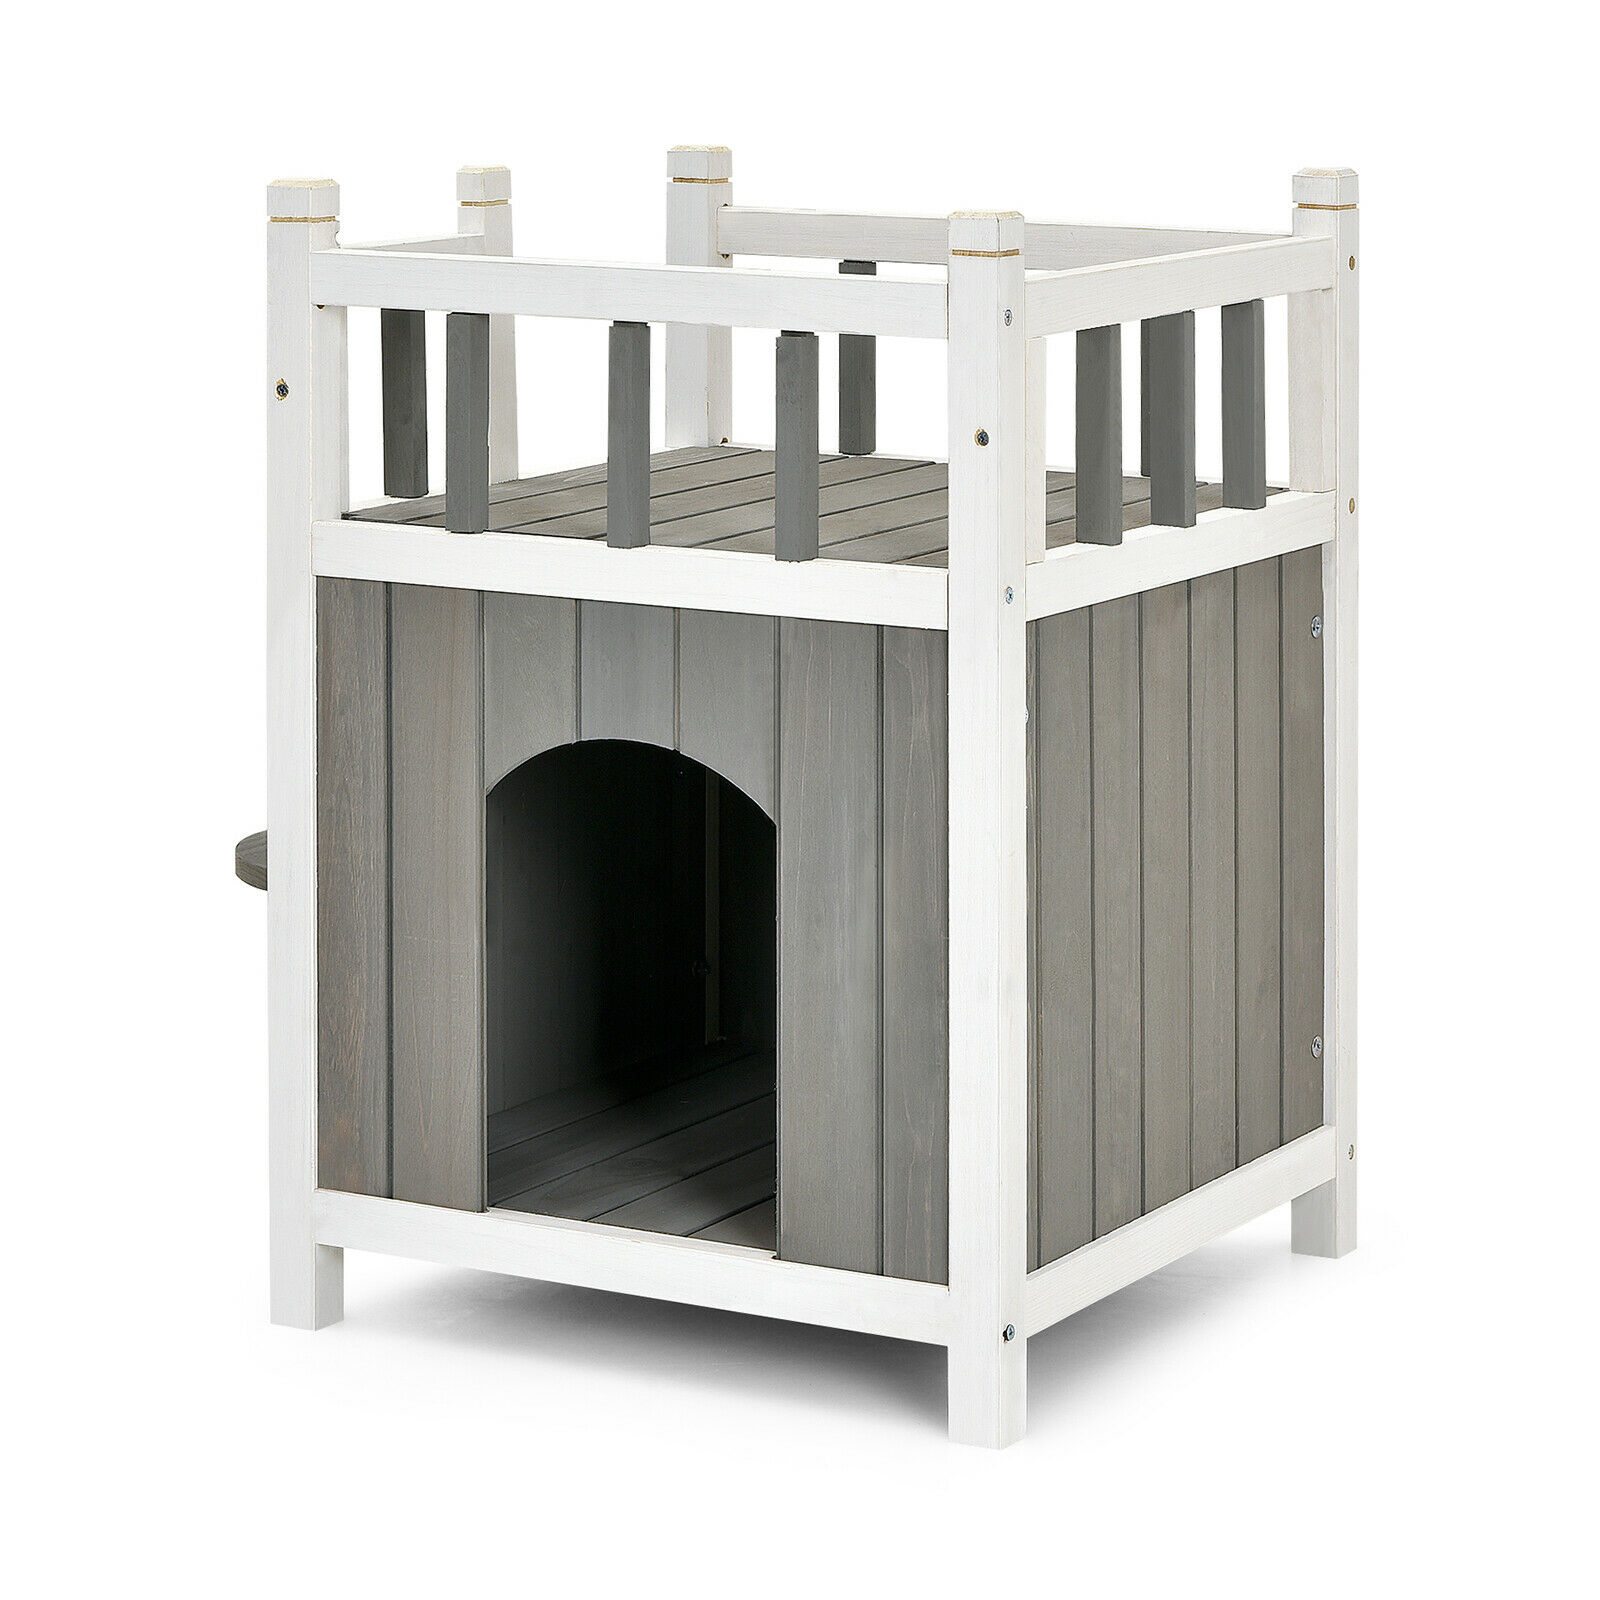 2 Story Wooden Cat House with Jumping Stairs and Enclosures